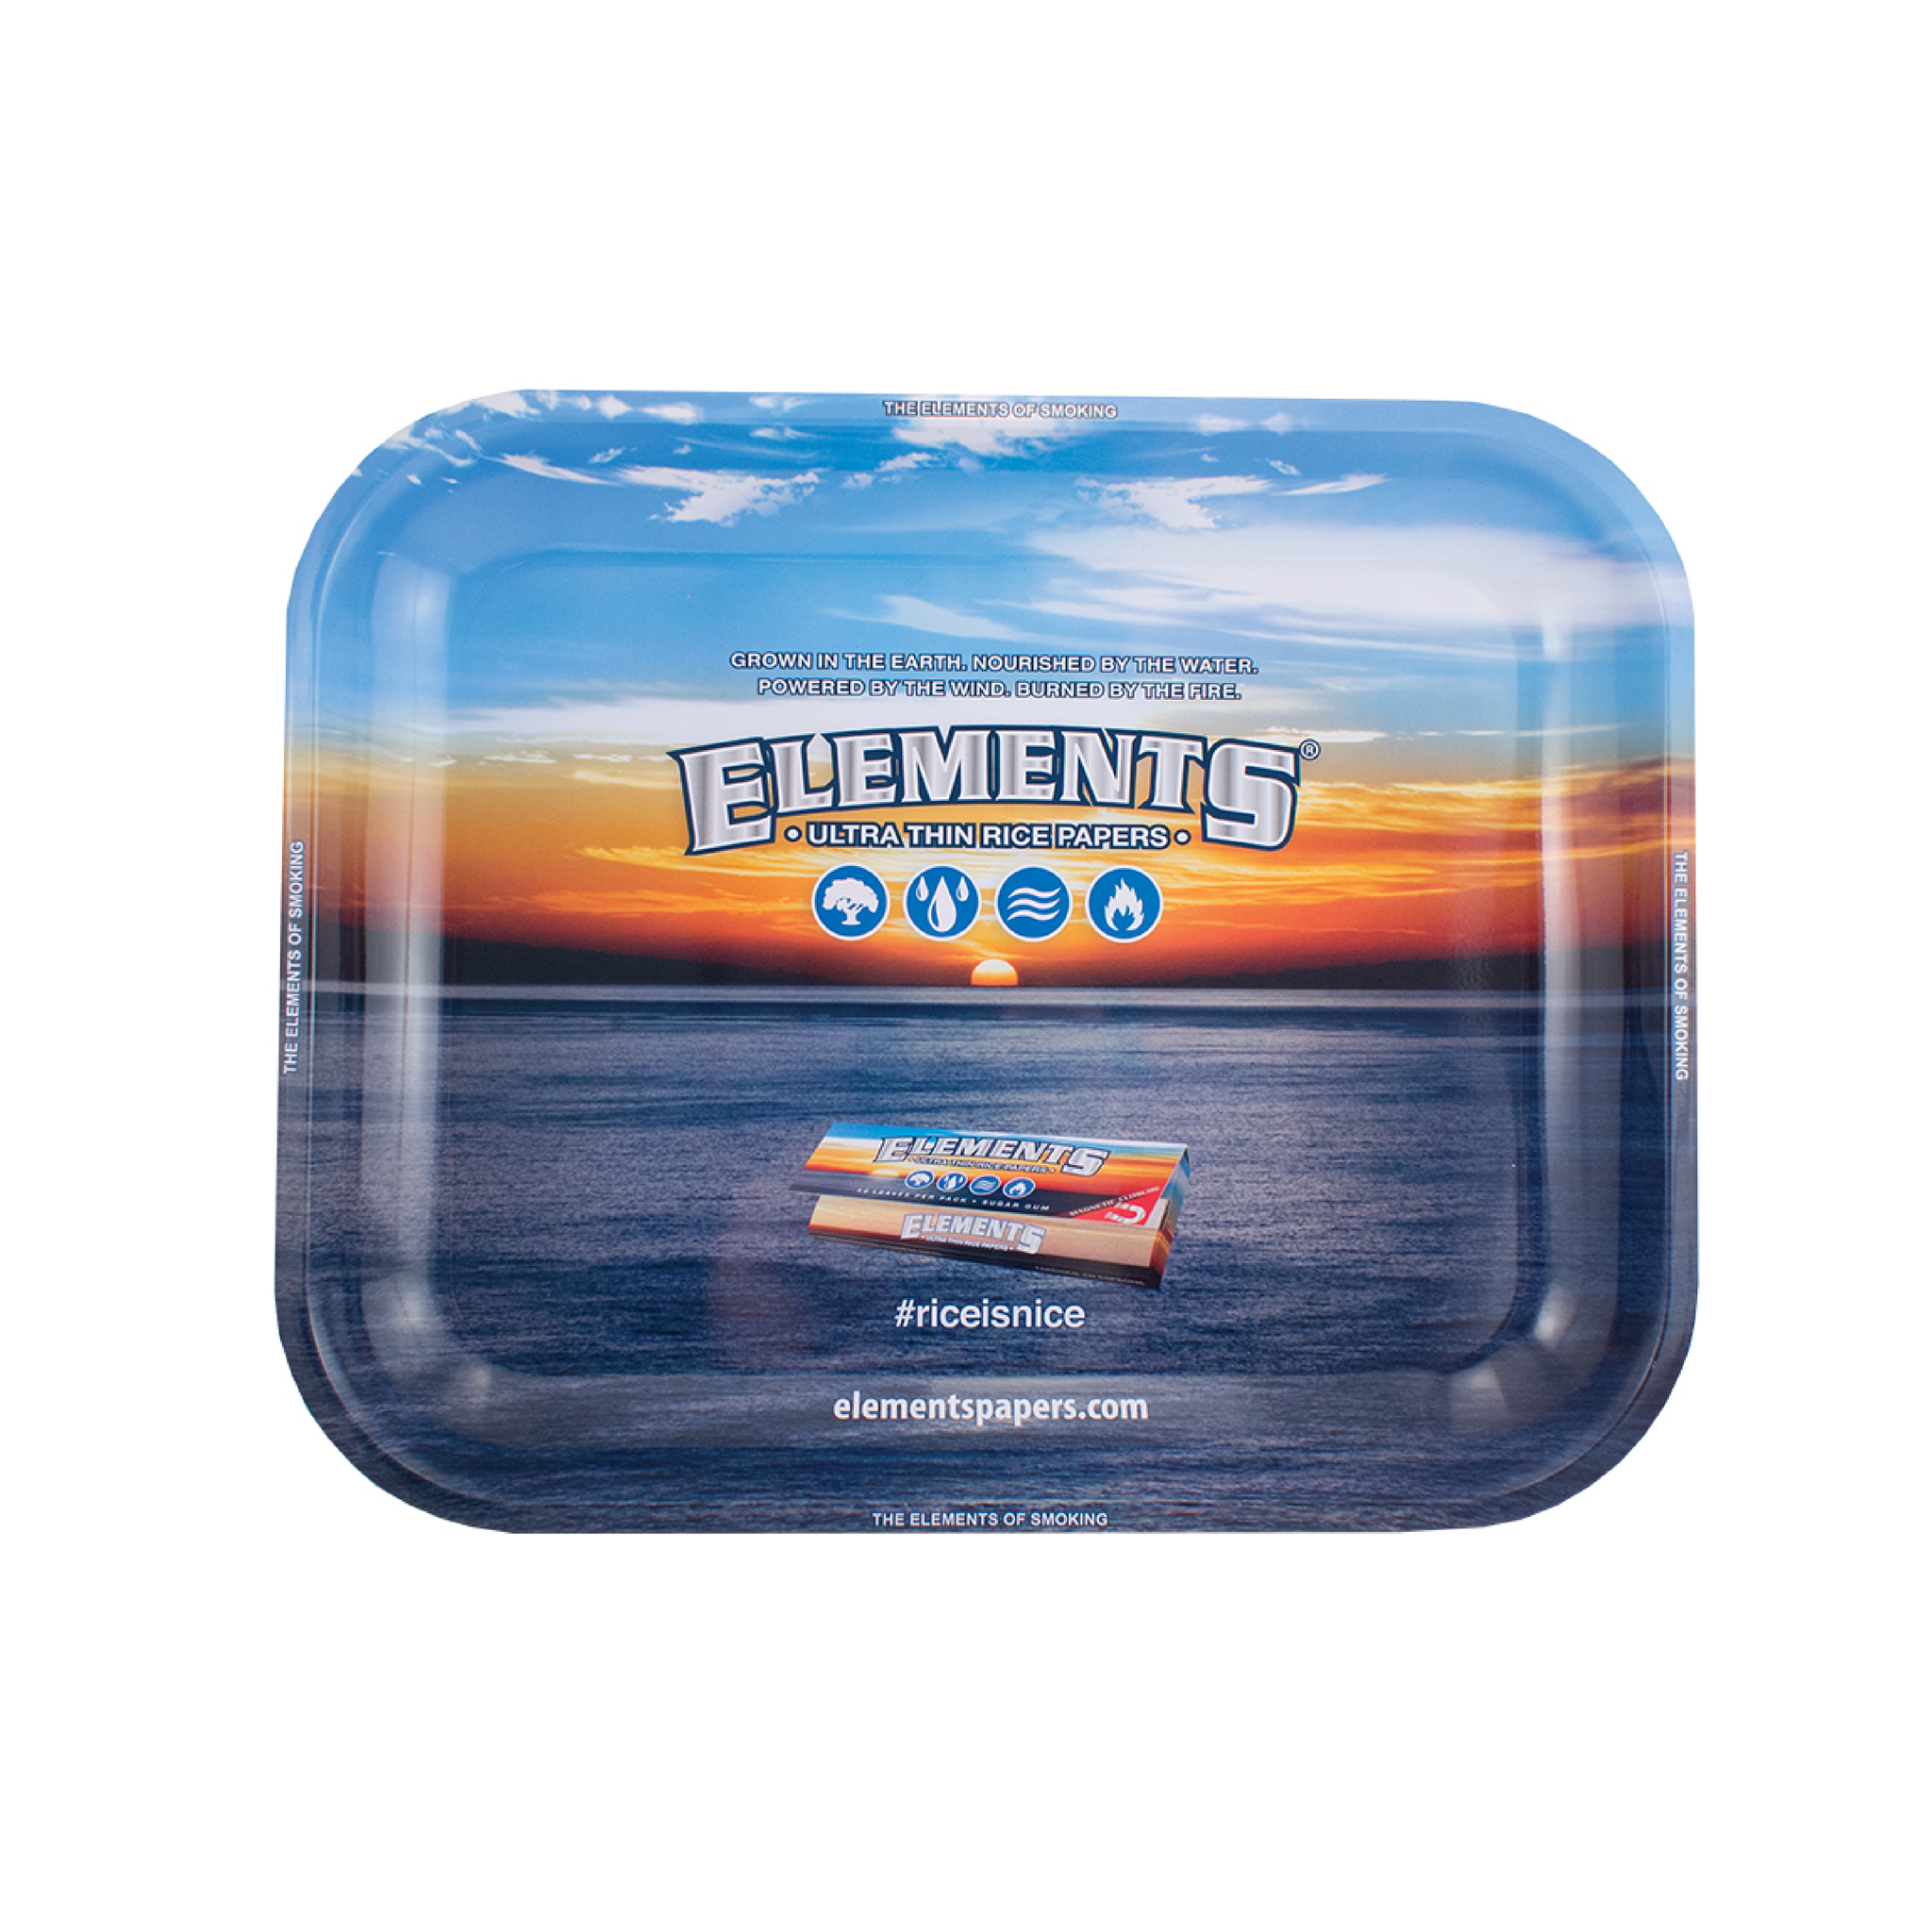 Elements Rolling Tray (Large)